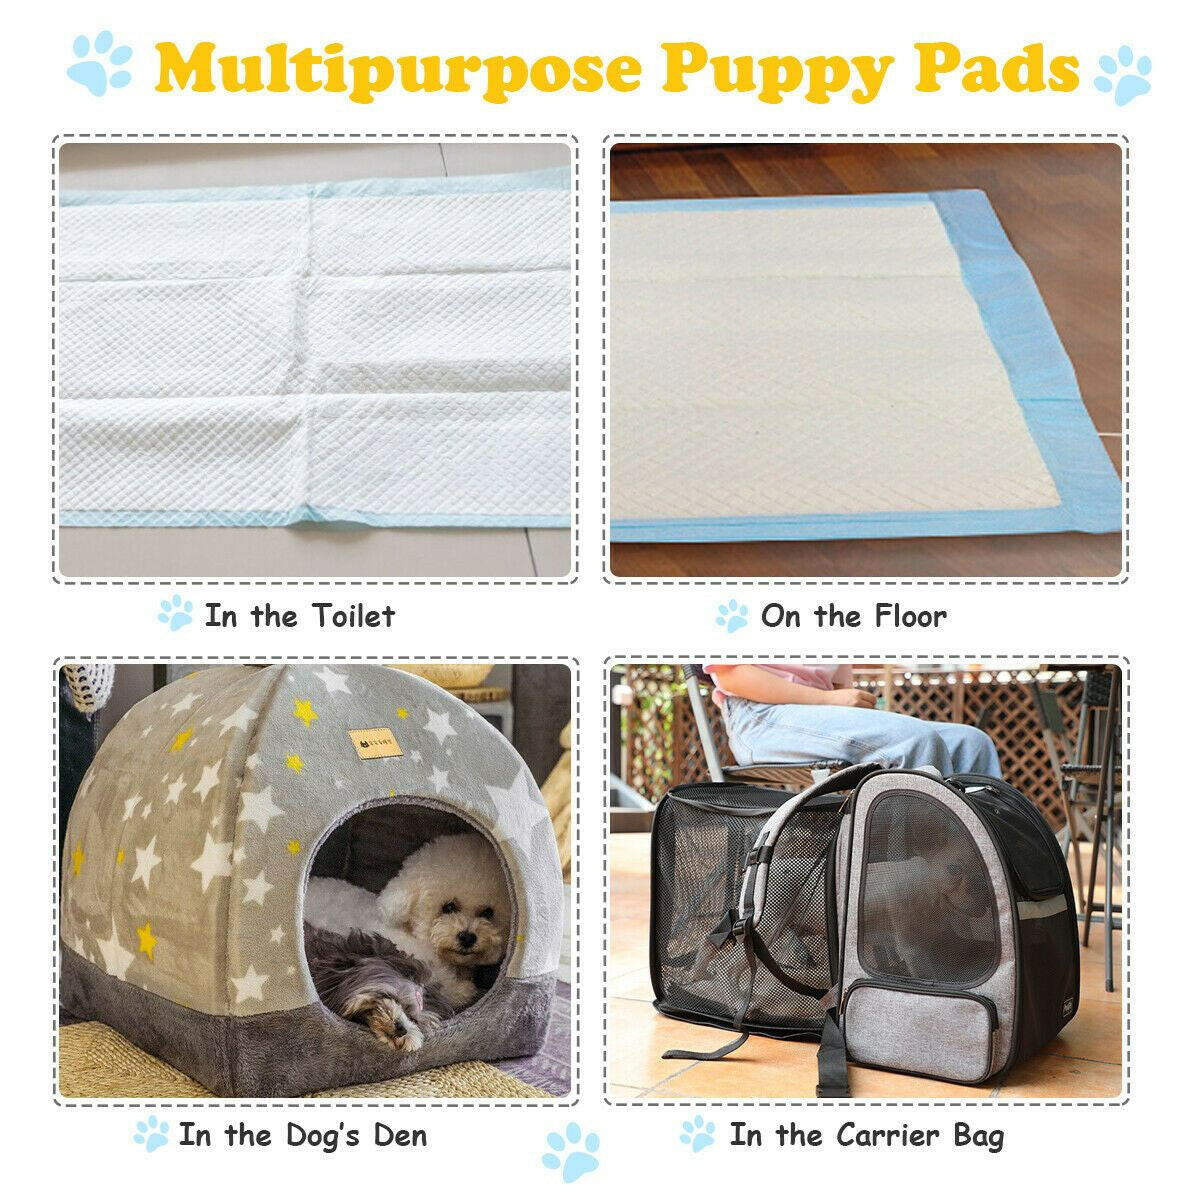 High-Quality Dog Pee Pads with 5-Layer Design in 4 Sizes for Maximum Absorbency and Ease of Use